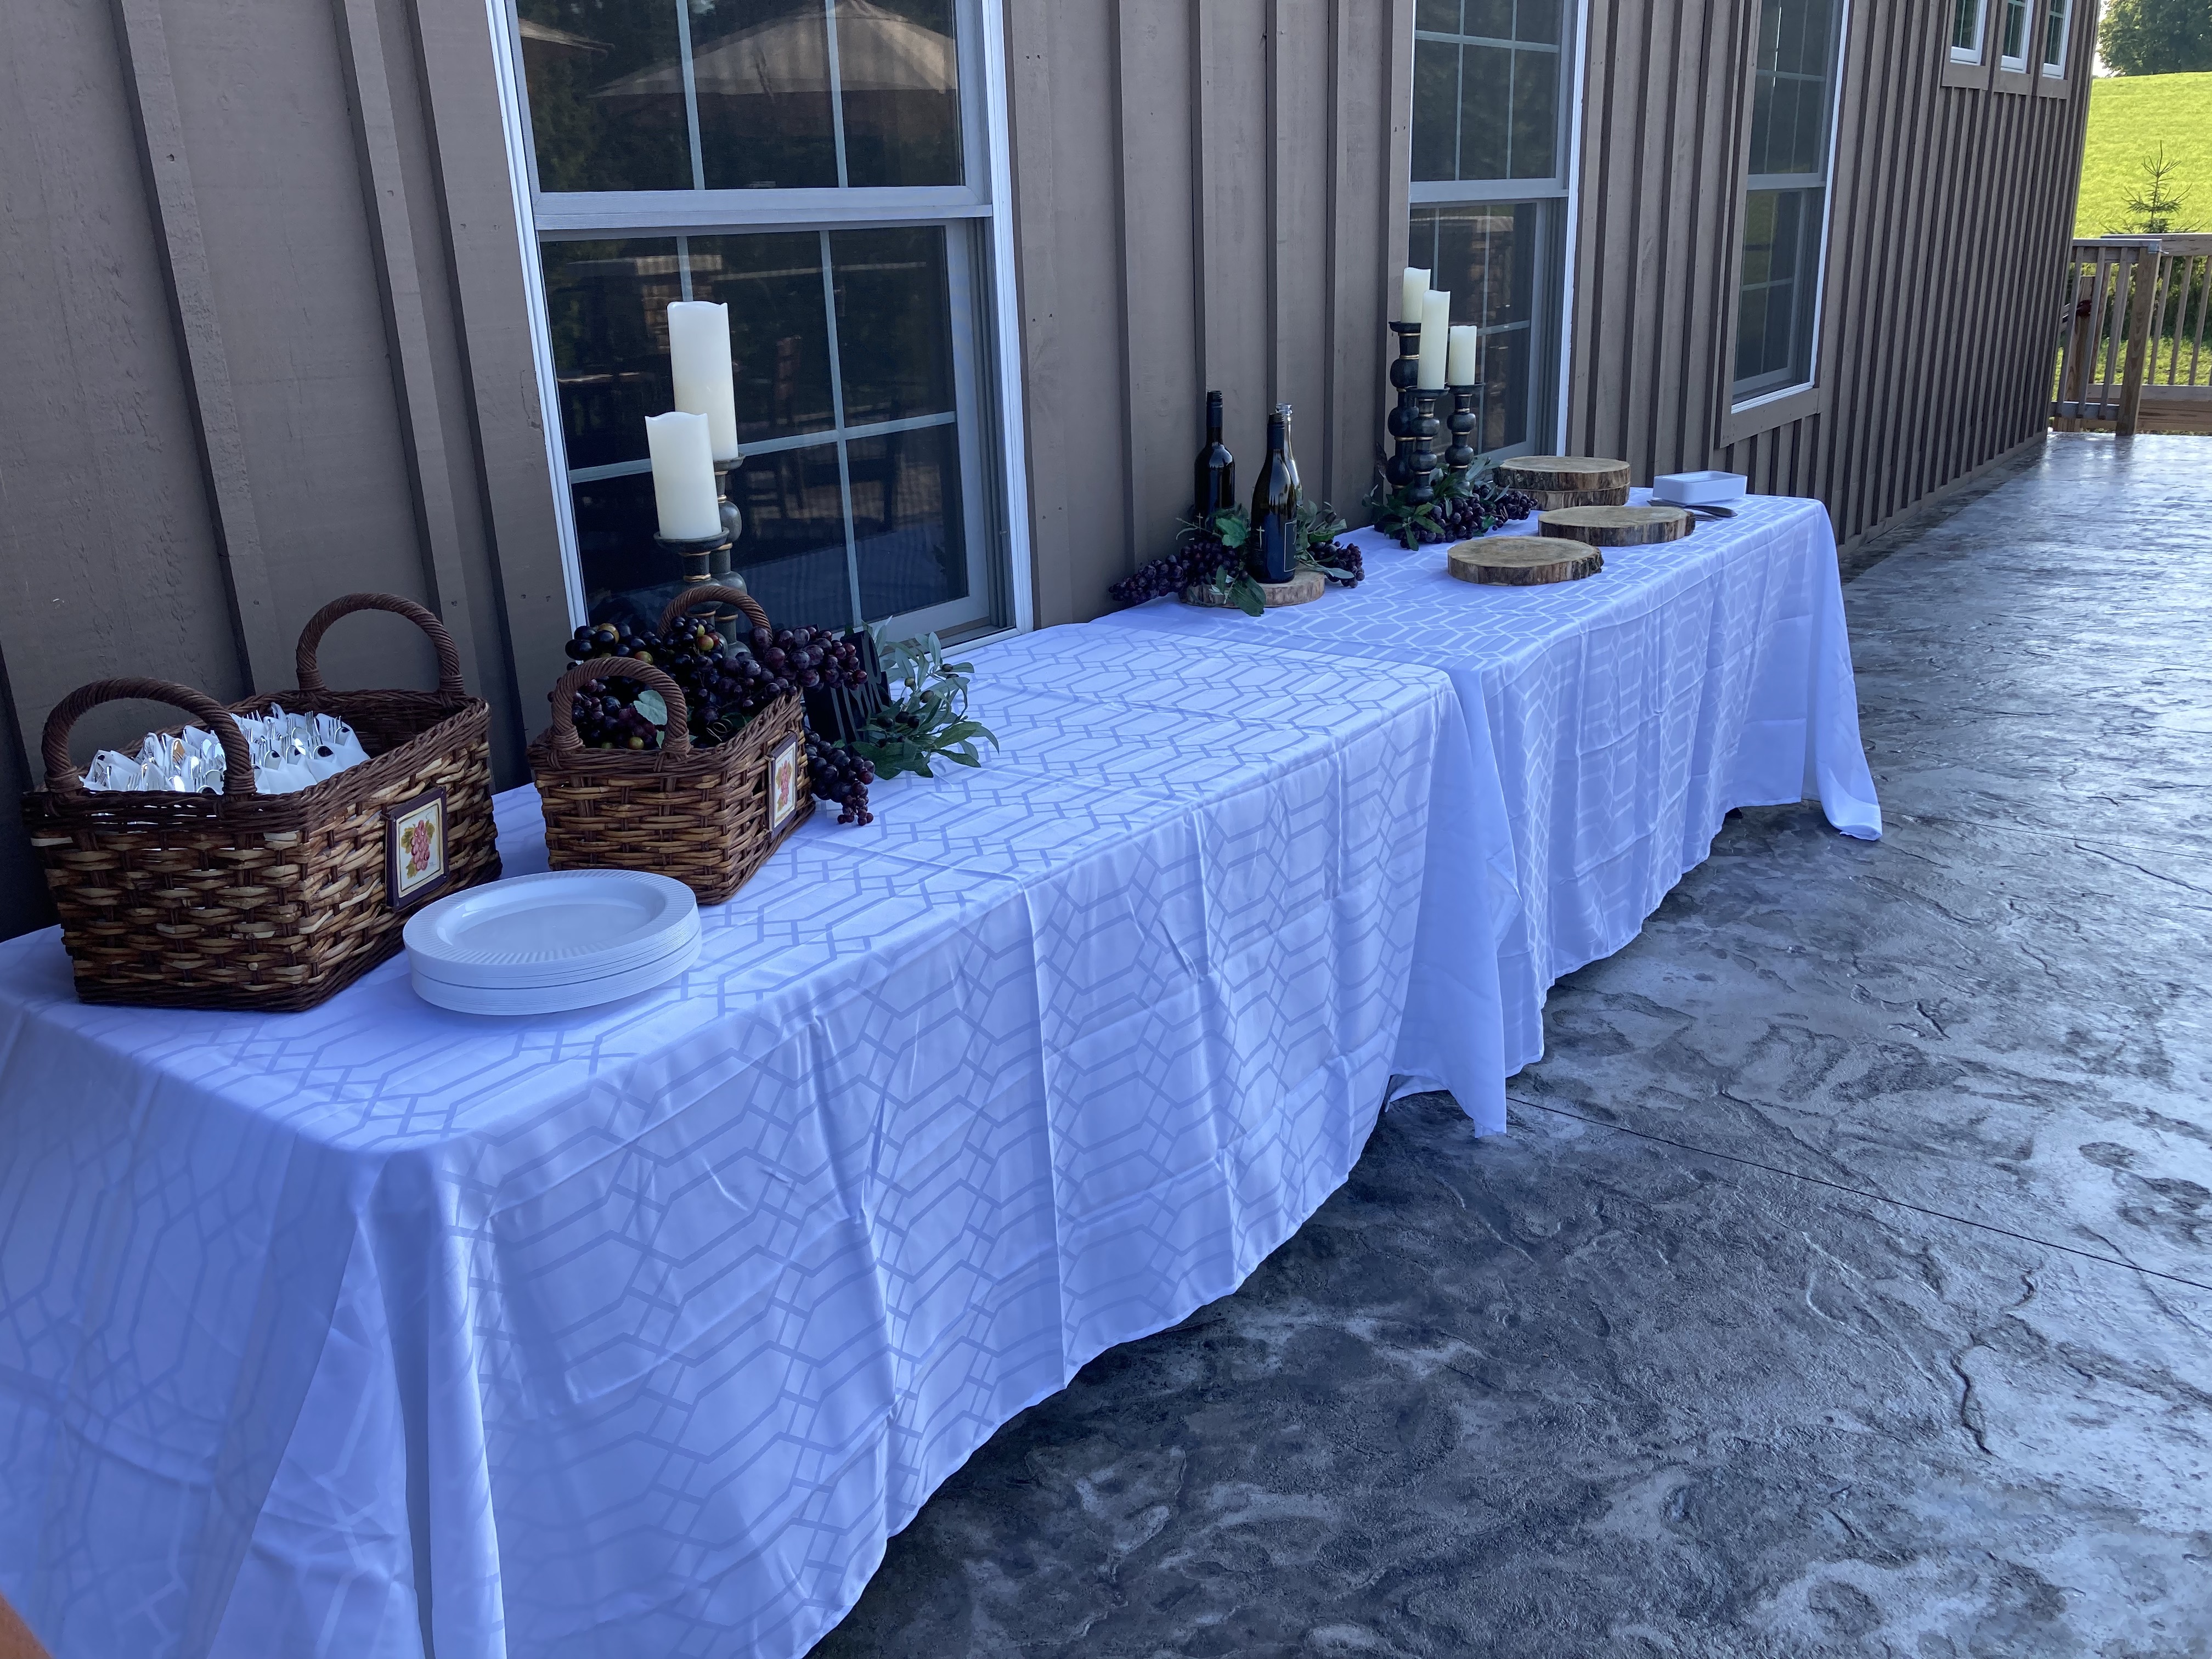 A table decorated for an event.